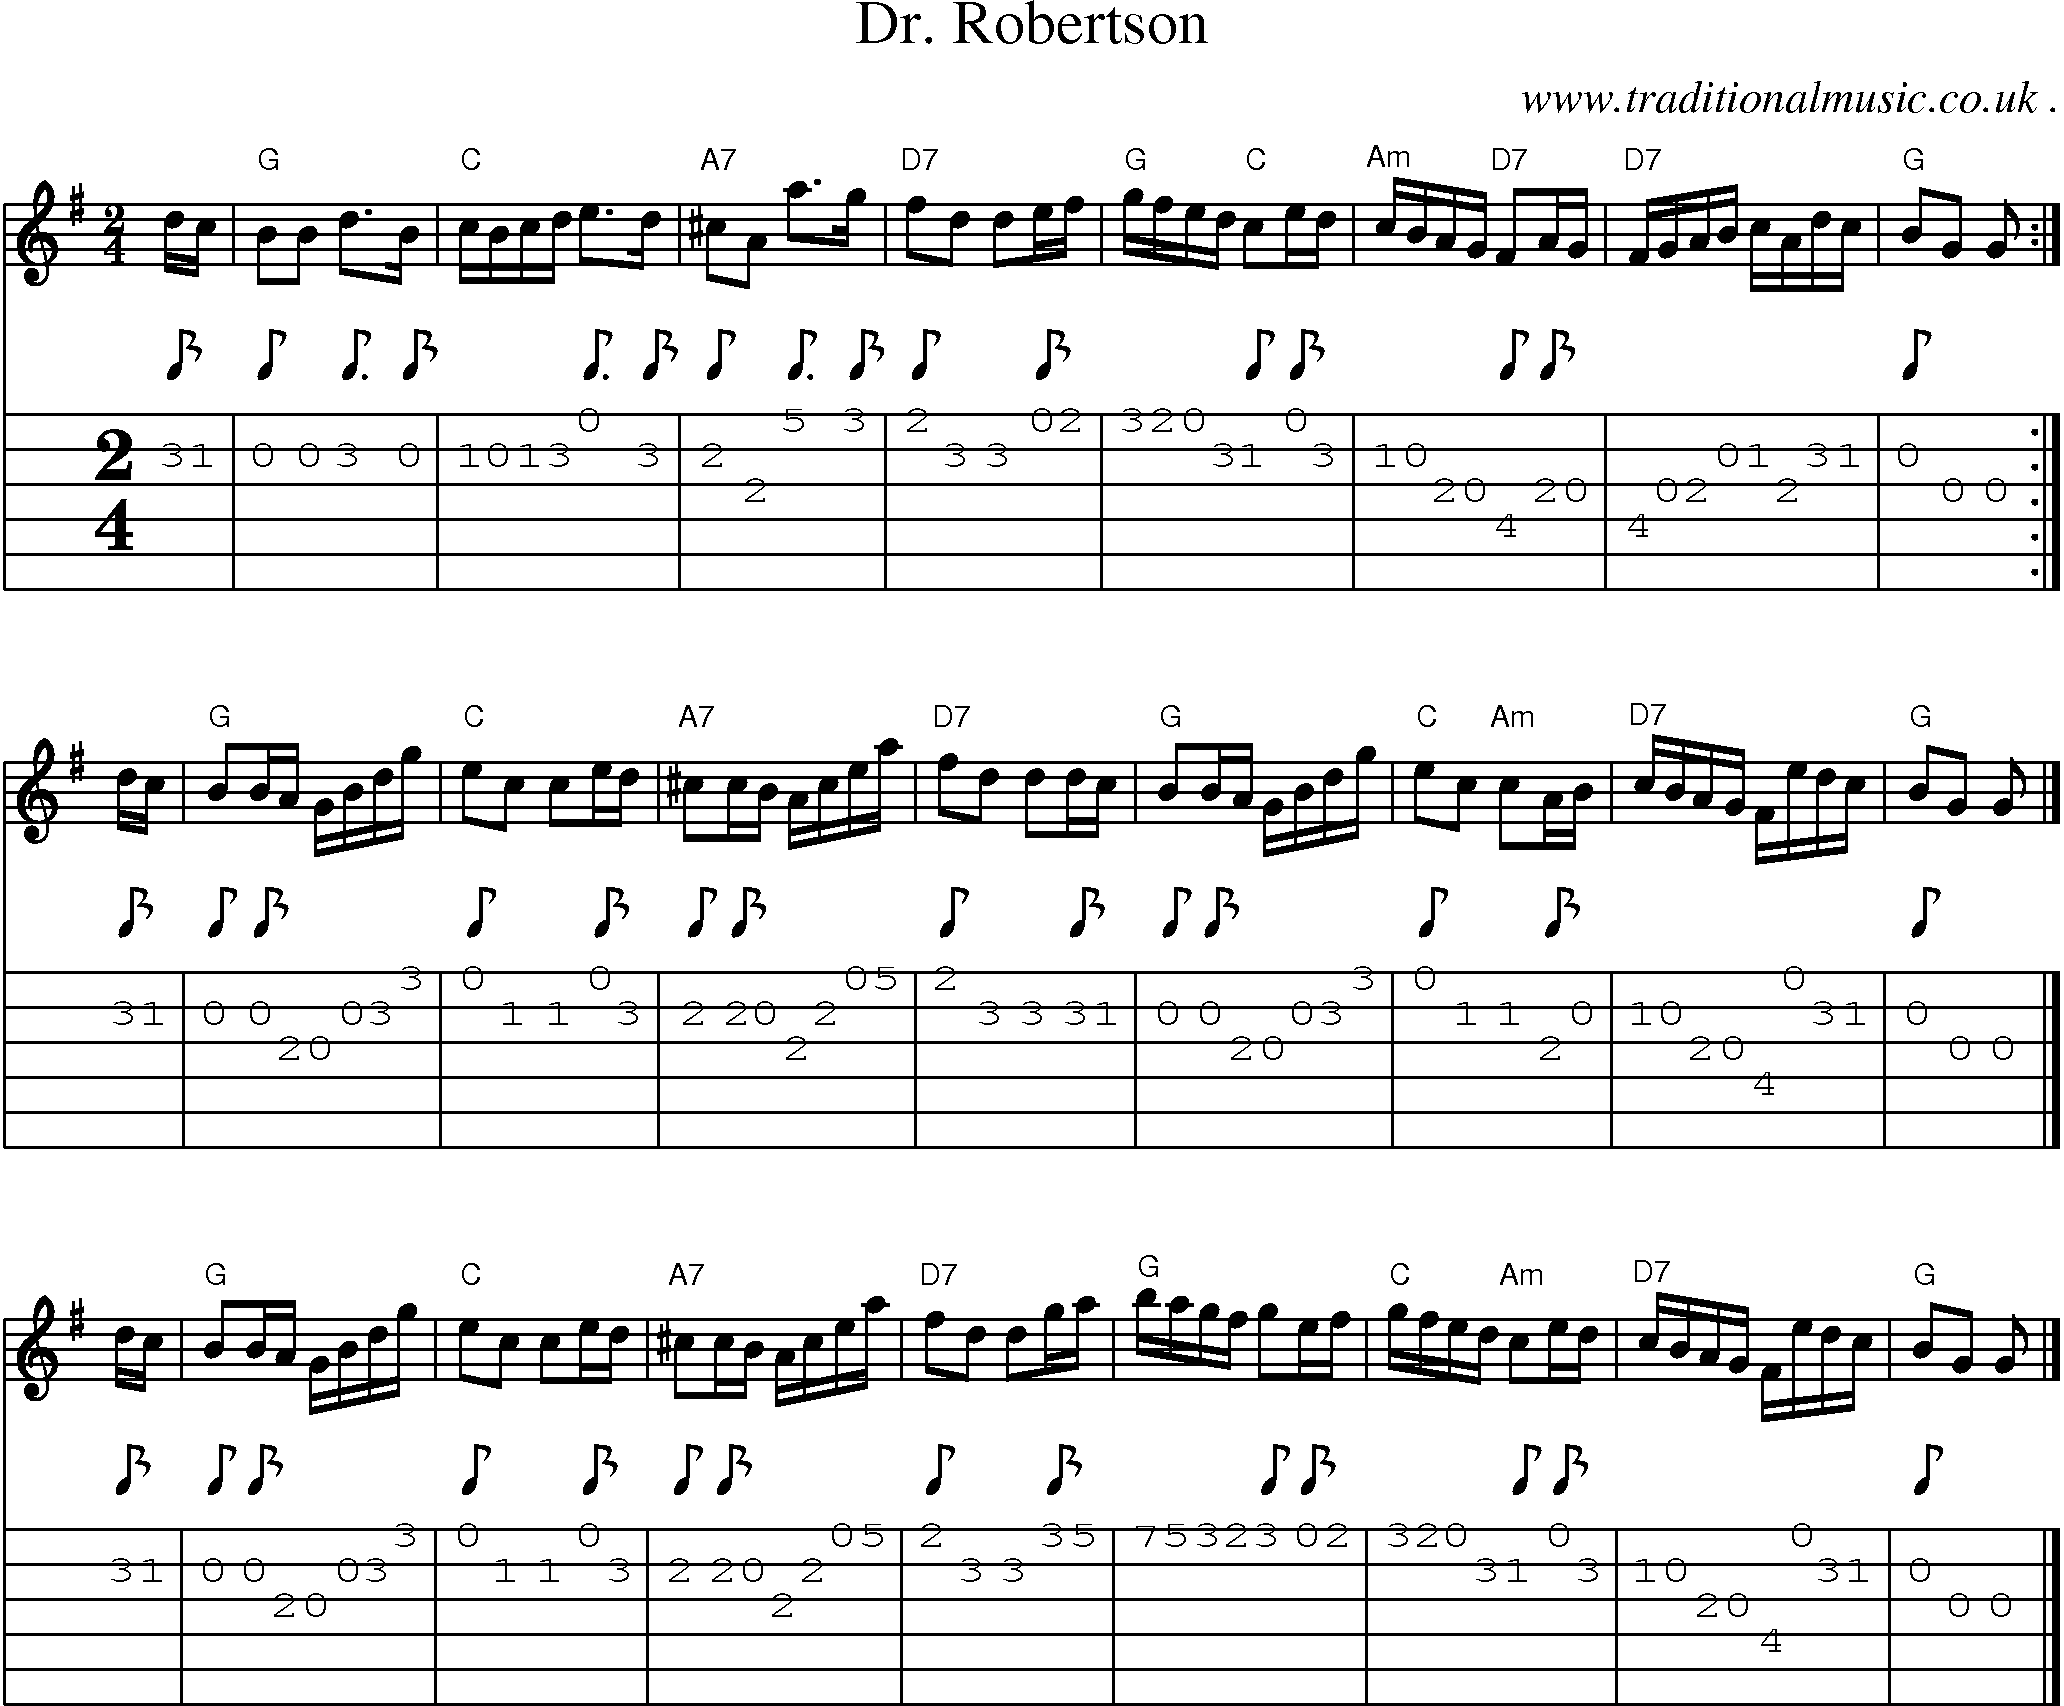 Sheet-music  score, Chords and Guitar Tabs for Dr Robertson